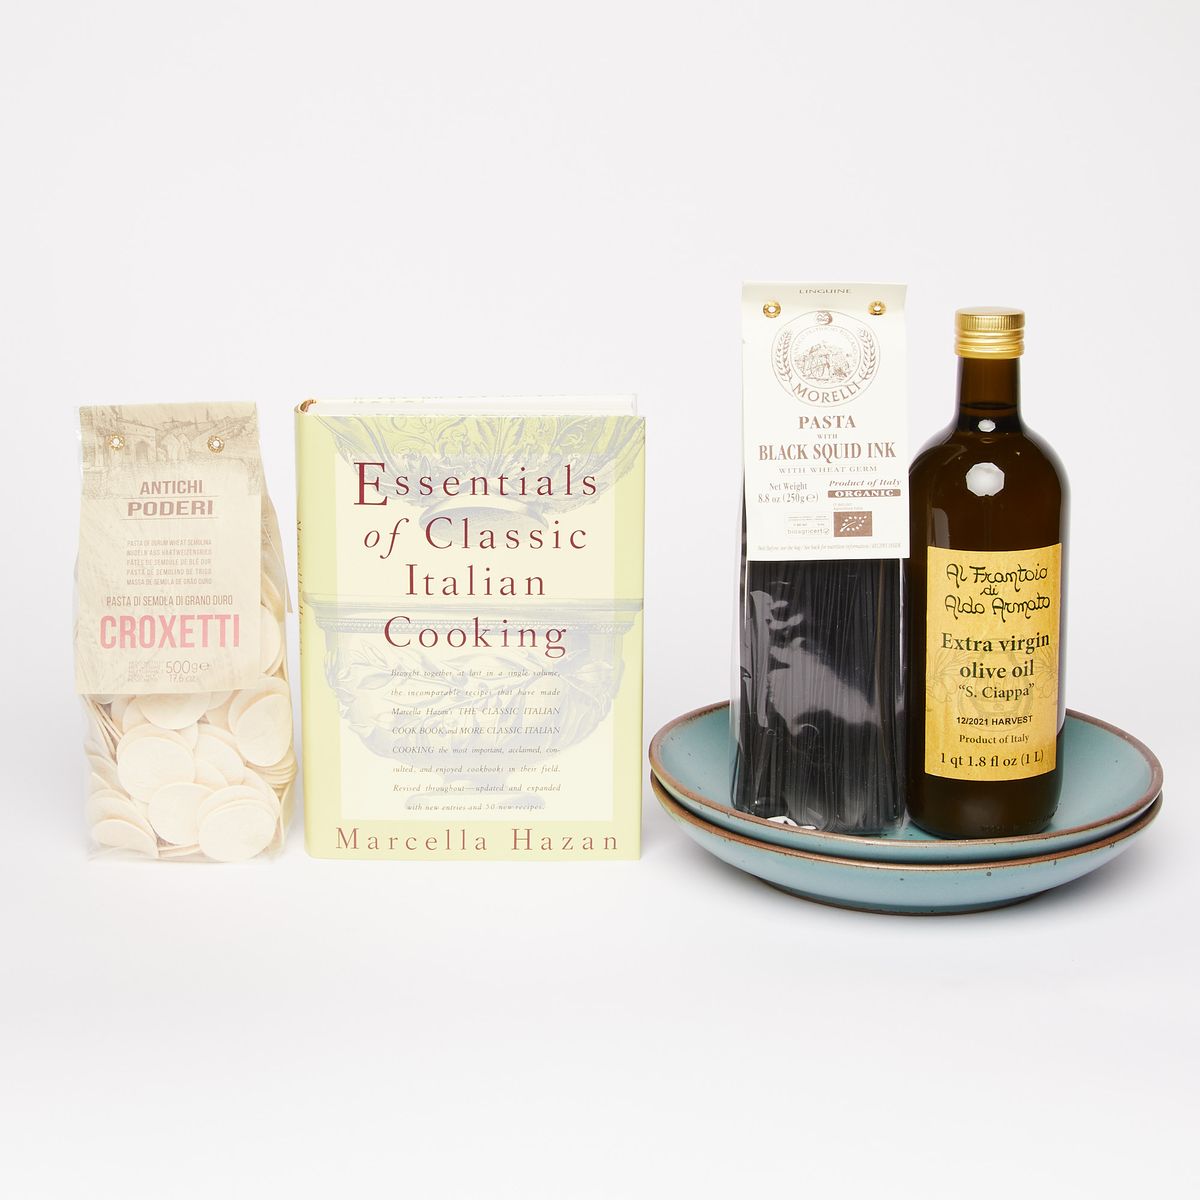 From left to right: A clear bag of round-shaped pasta, a book cover that reads "Essentials of Classic Italian Cooking", two stacked turquoise coupes holding a bag of black squid ink linguine and a dark bottle of olive oil